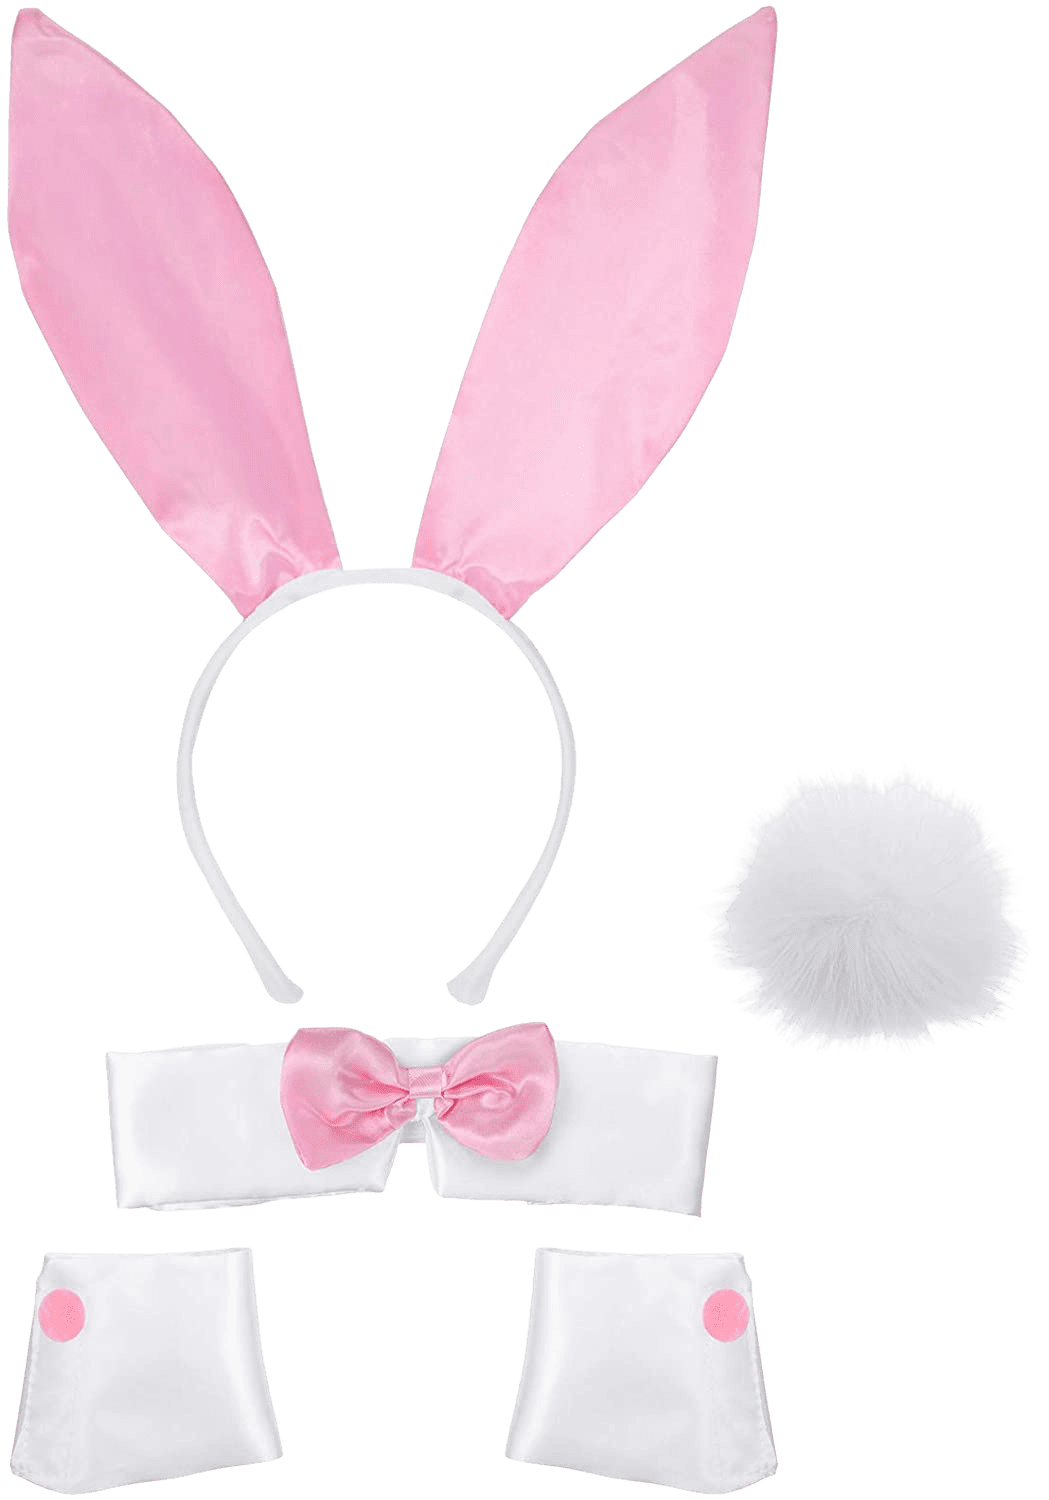 Bunny Accessory Set Rabbit Ear Headband Bow Tie Cuffs Tail for Costume Party | Decor Gifts and More